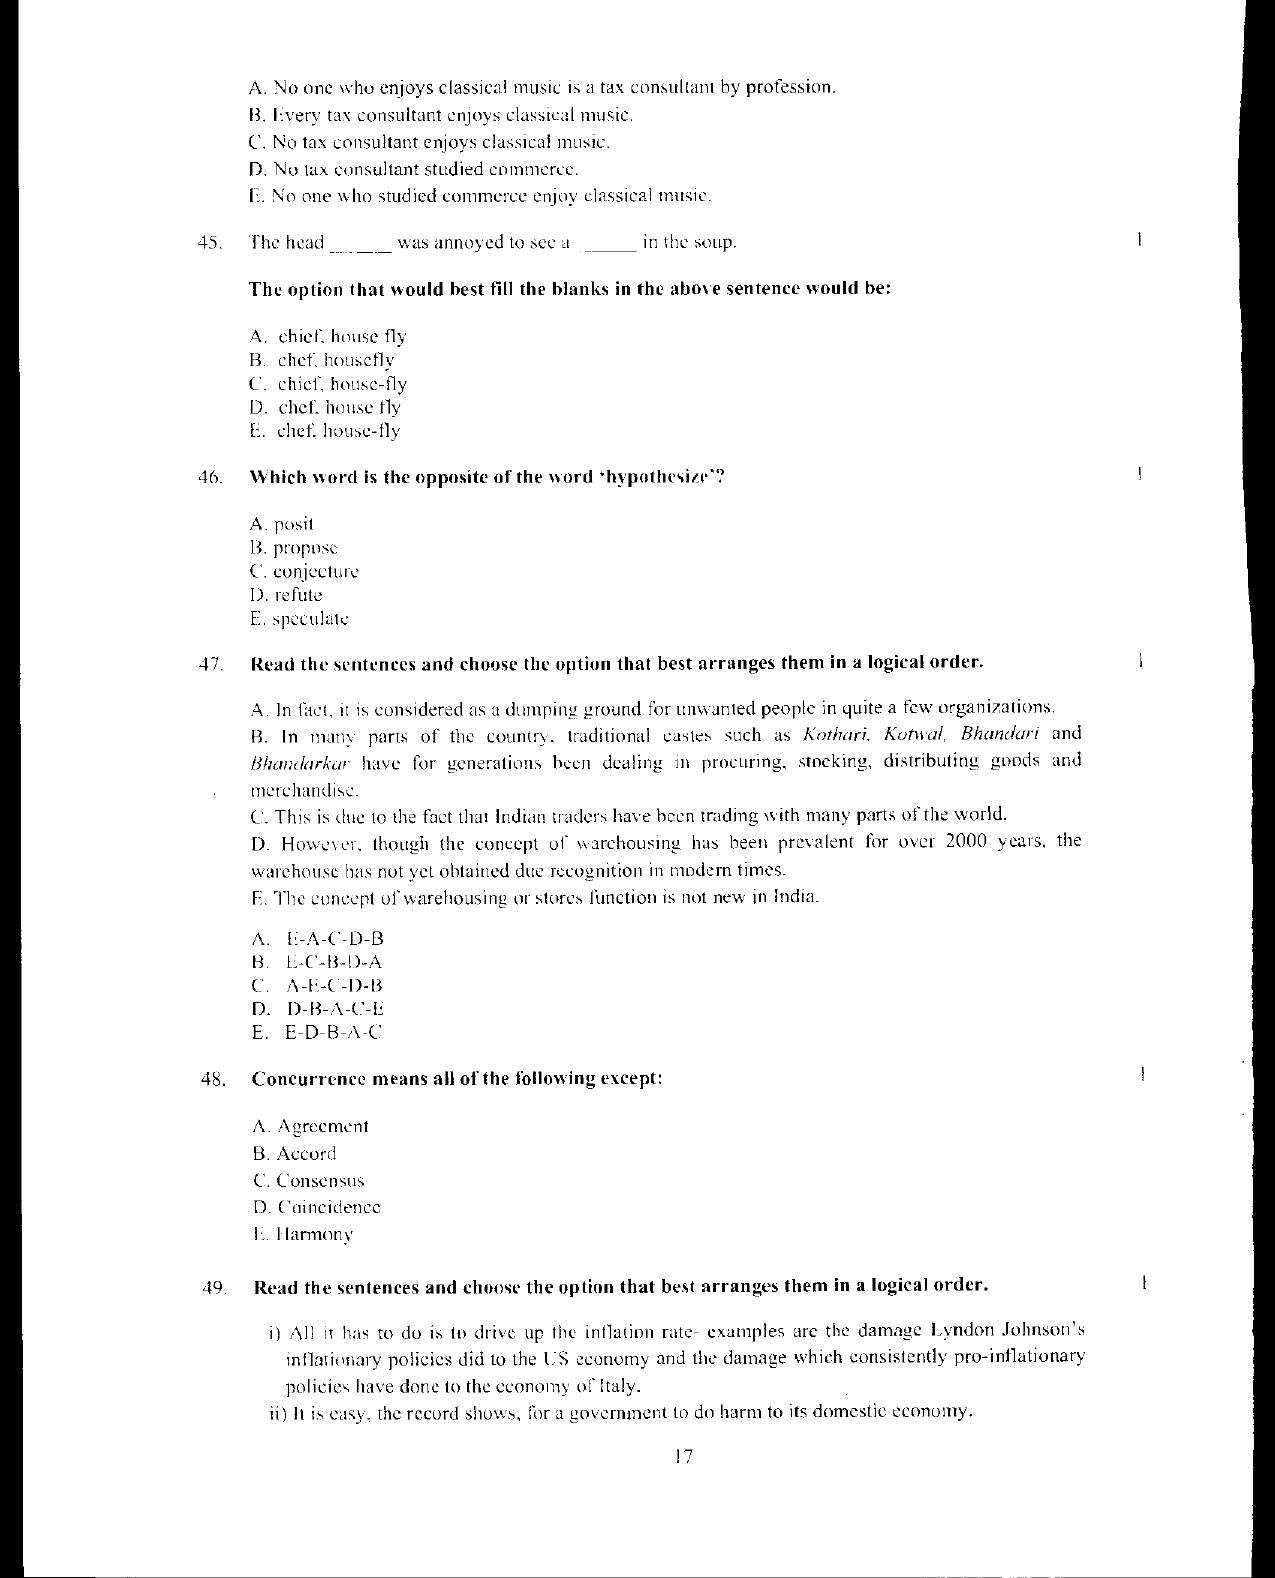 XAT 2012 Question Papers - Page 18